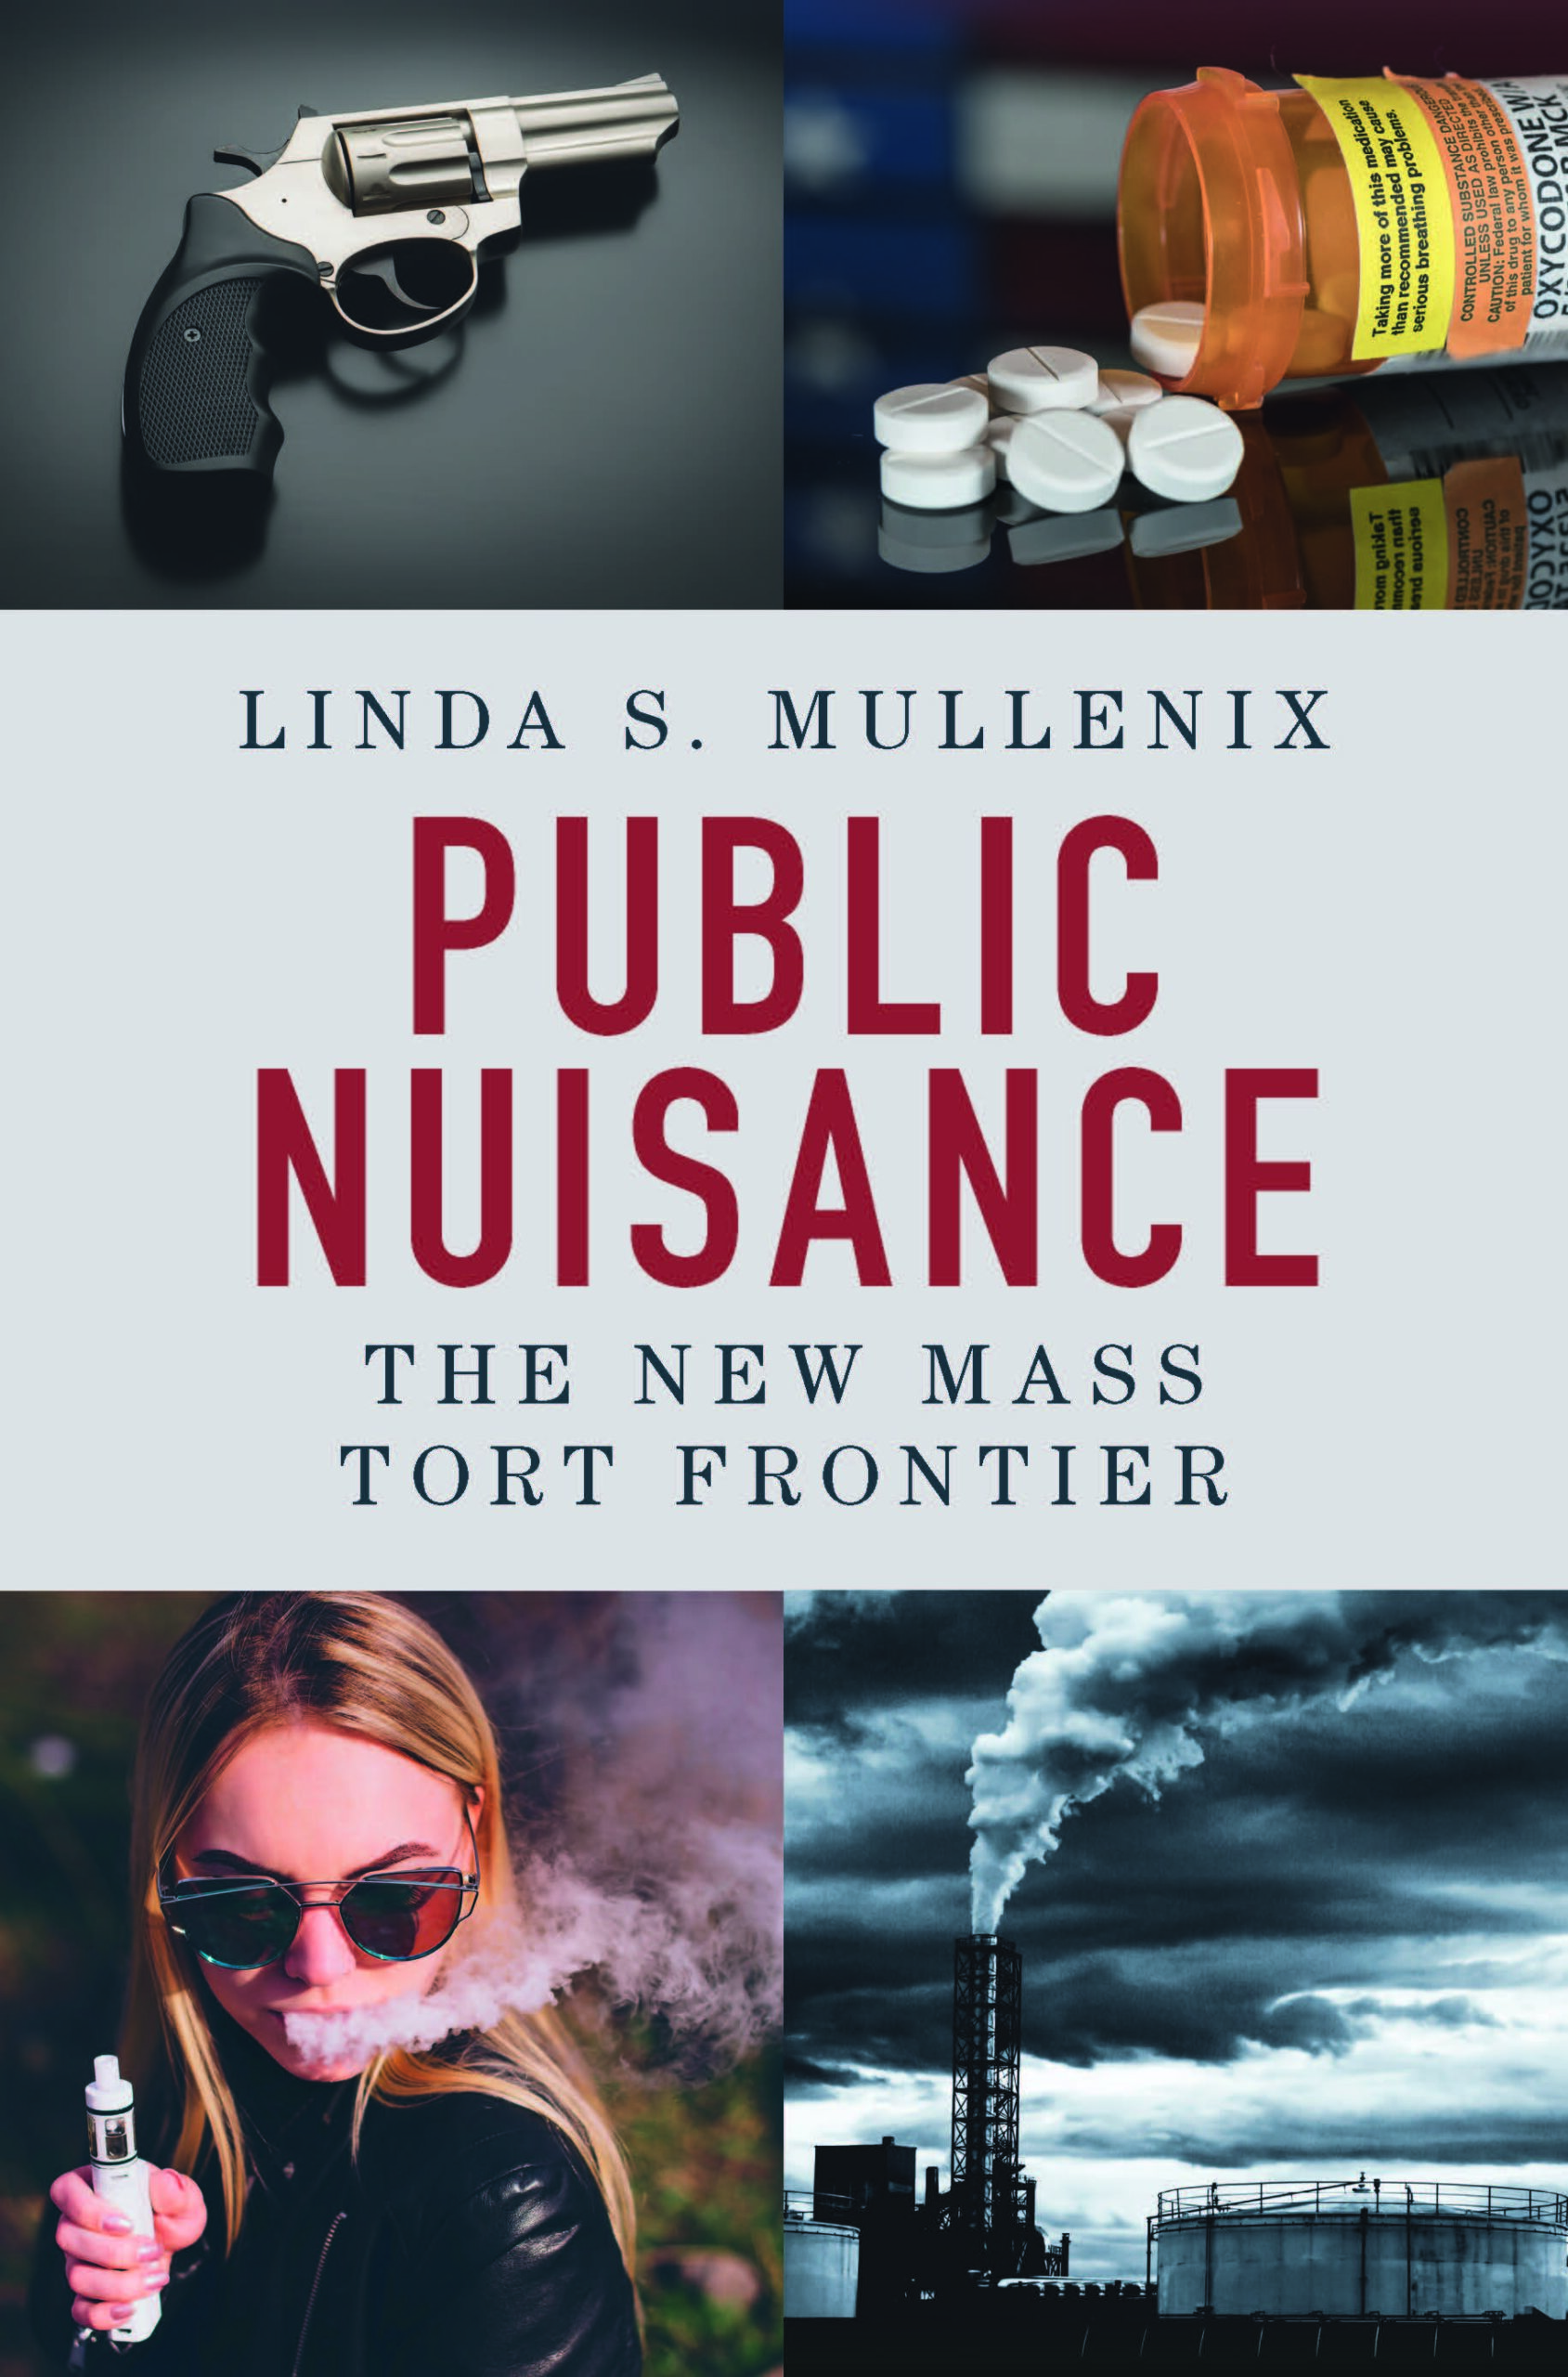 'Public Nuisance' book cover